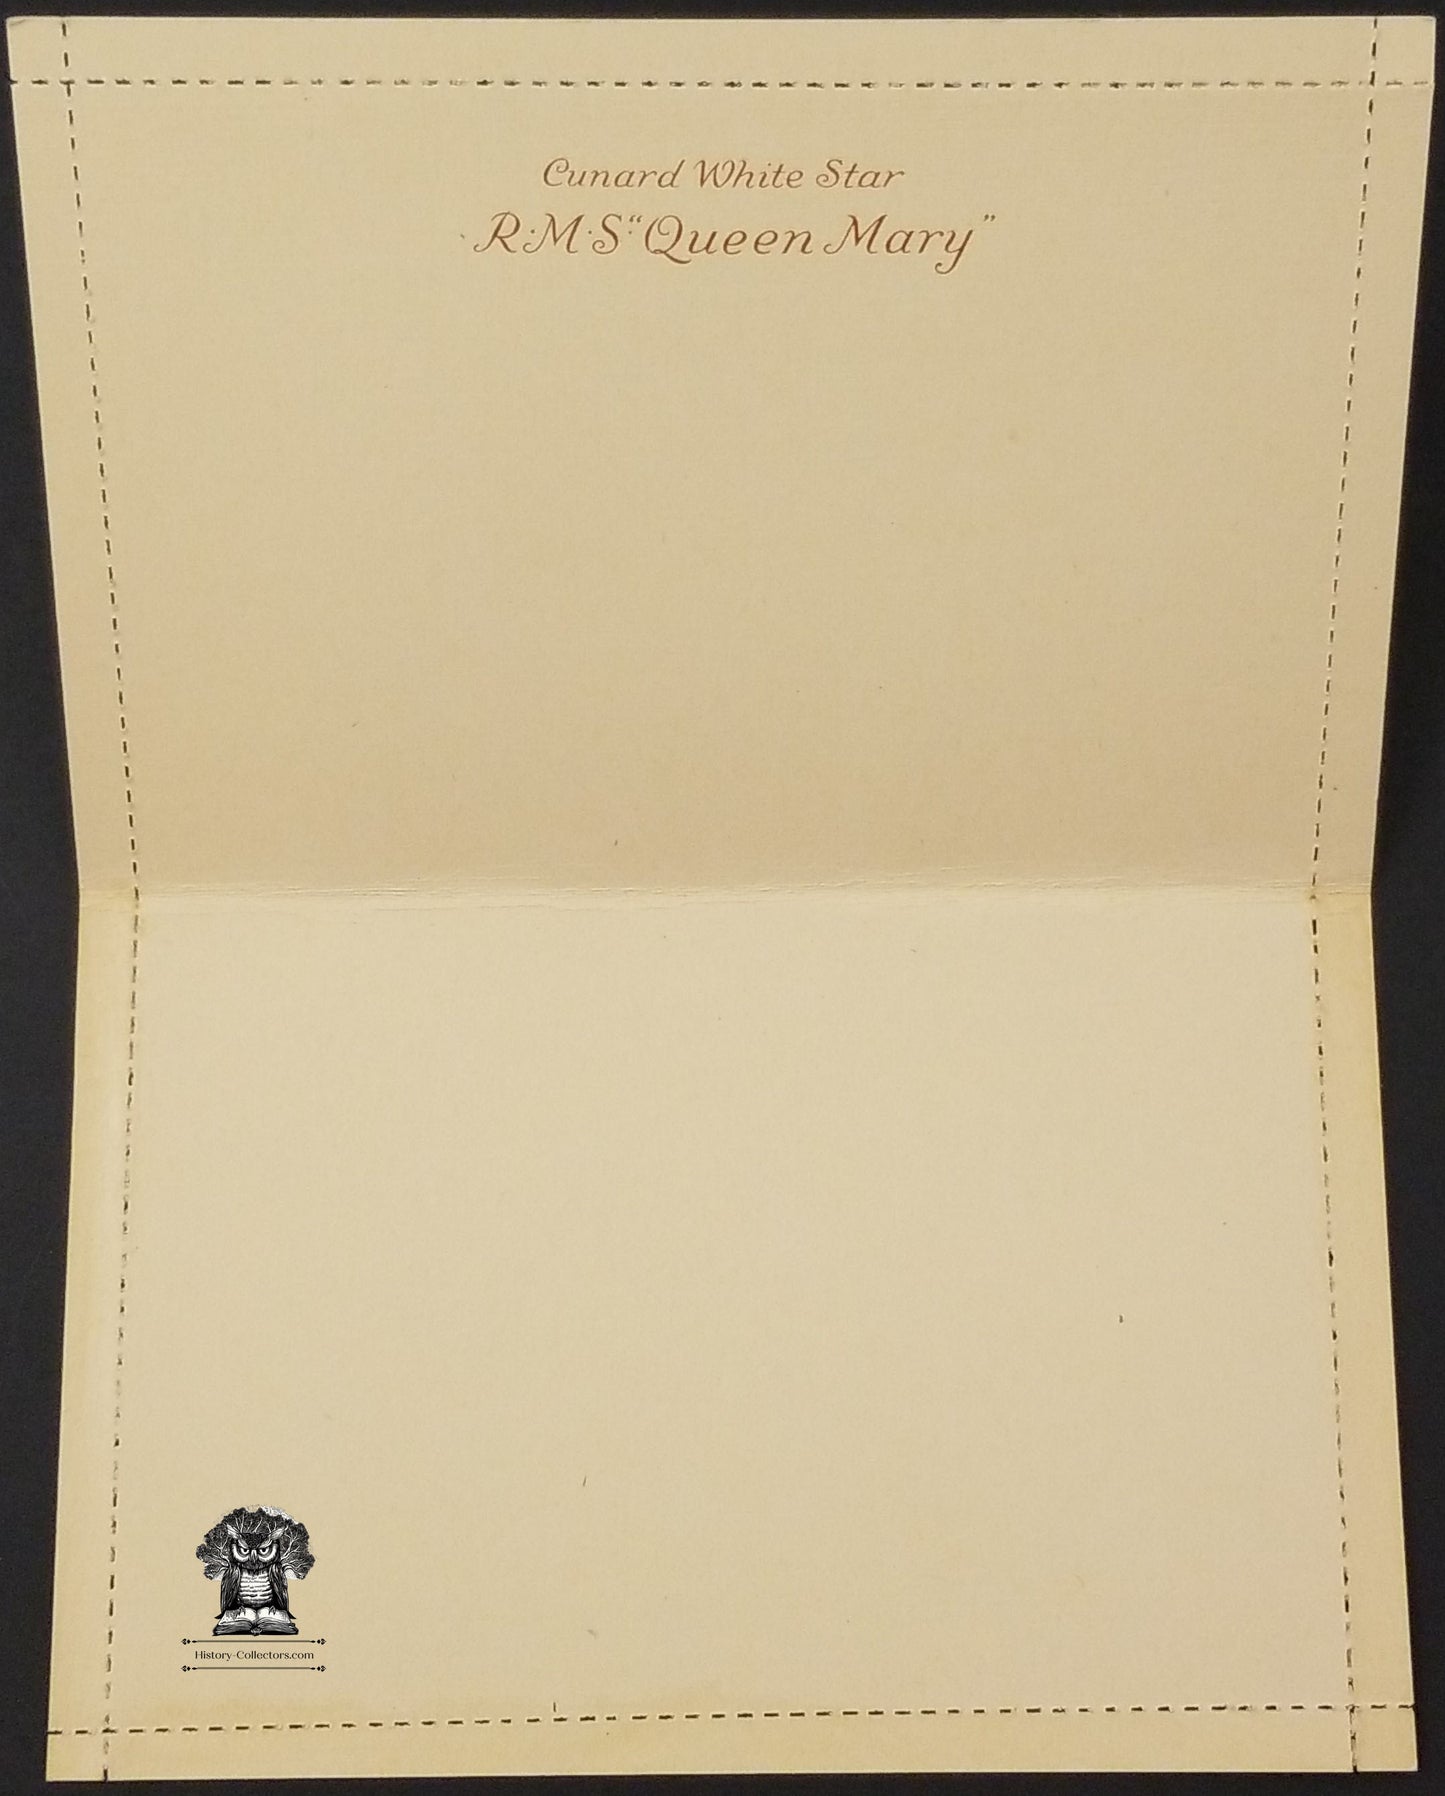 RMS Queen Mary Stationary Letter Post Card - Cunard White Star Atlantic Cruise